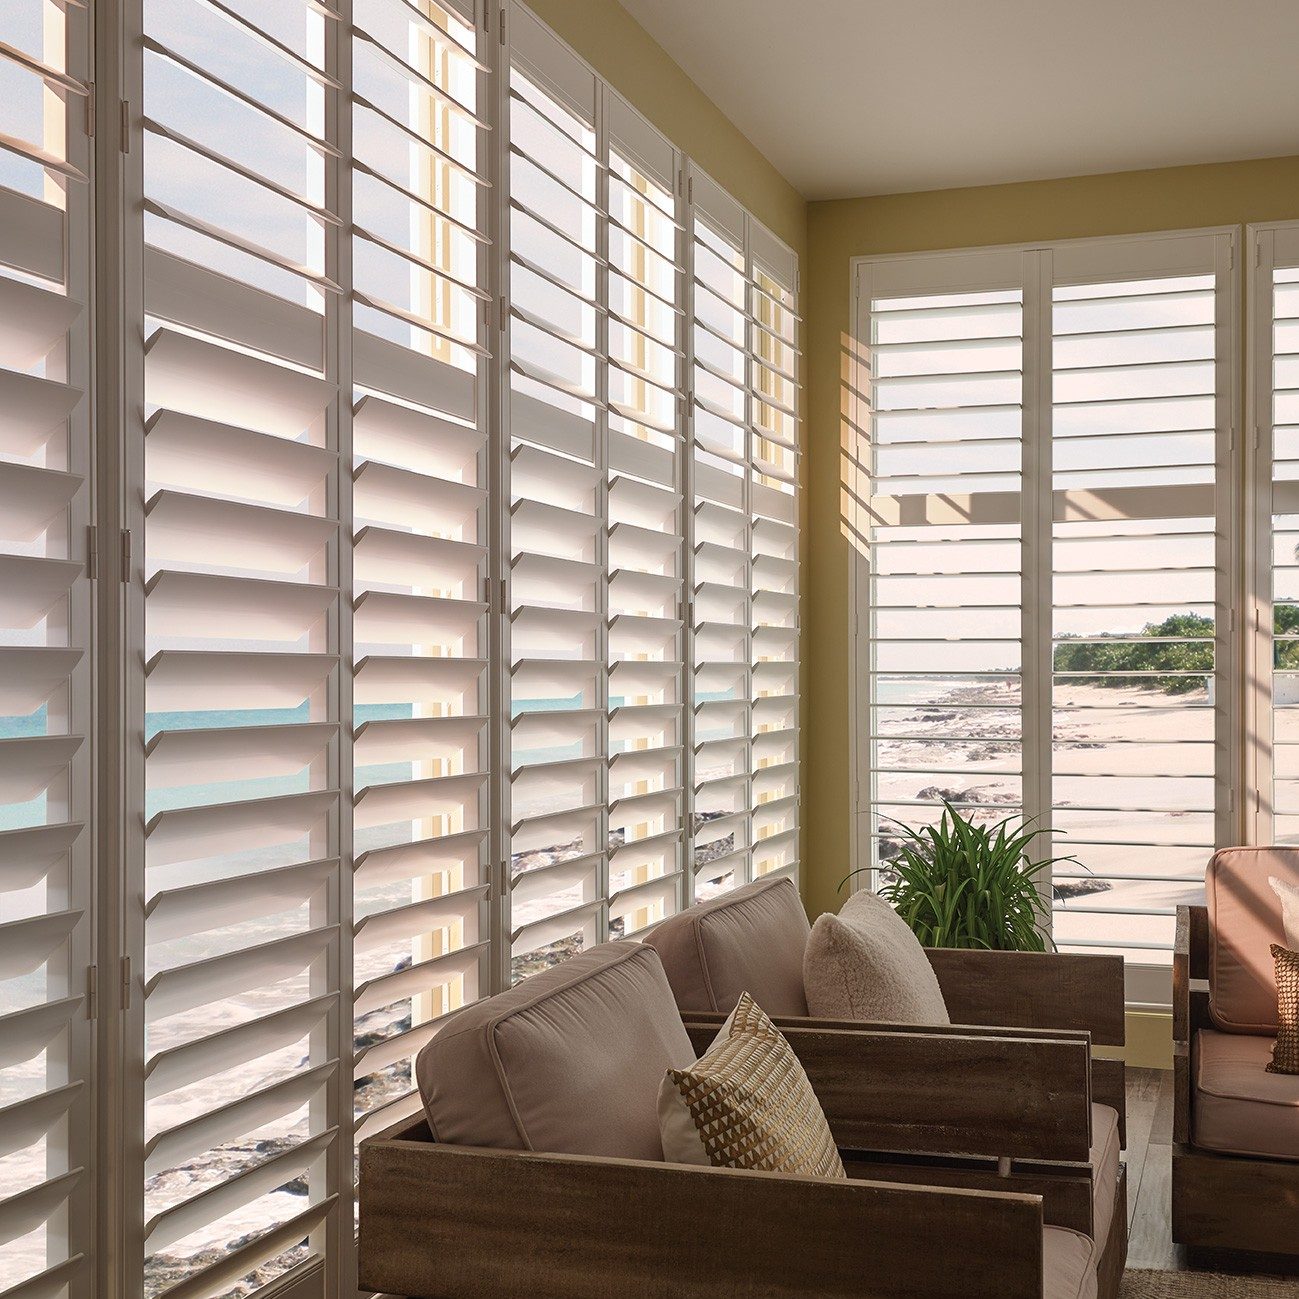 polyresin white interior shutters over tall windows